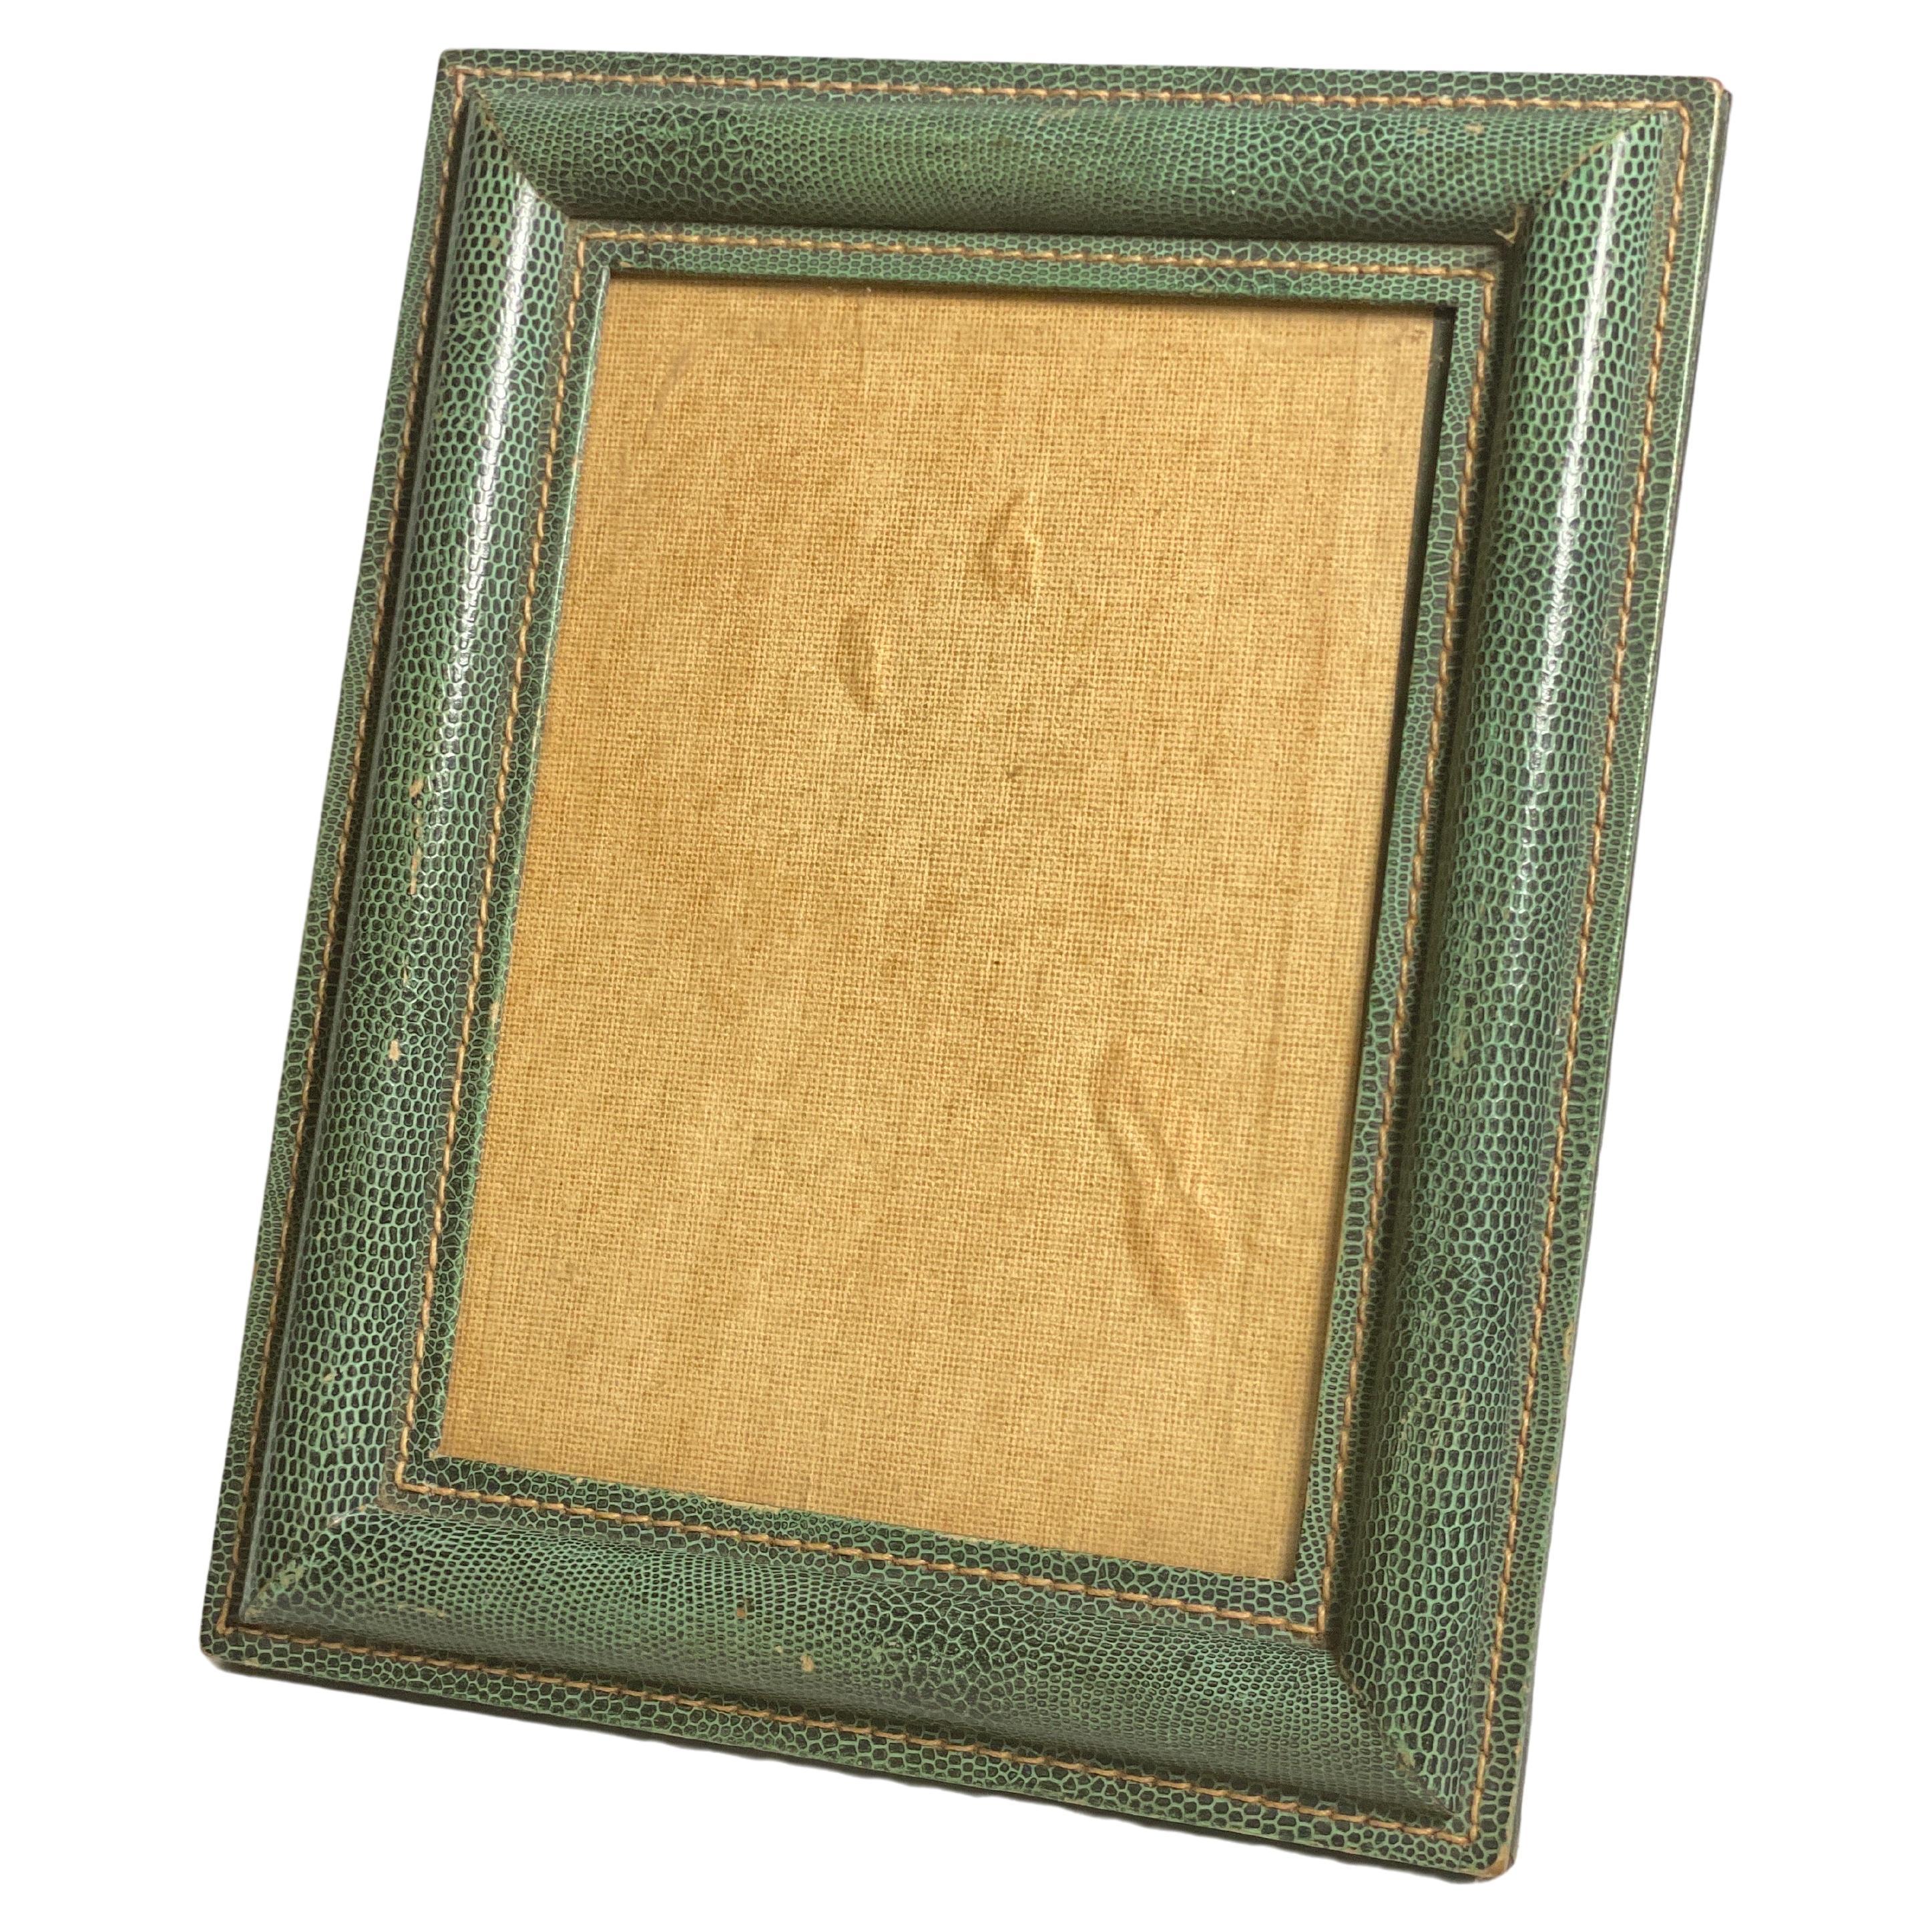 Jacques Adnet Style, Green Stitched Leather Picture Frame, France 1940